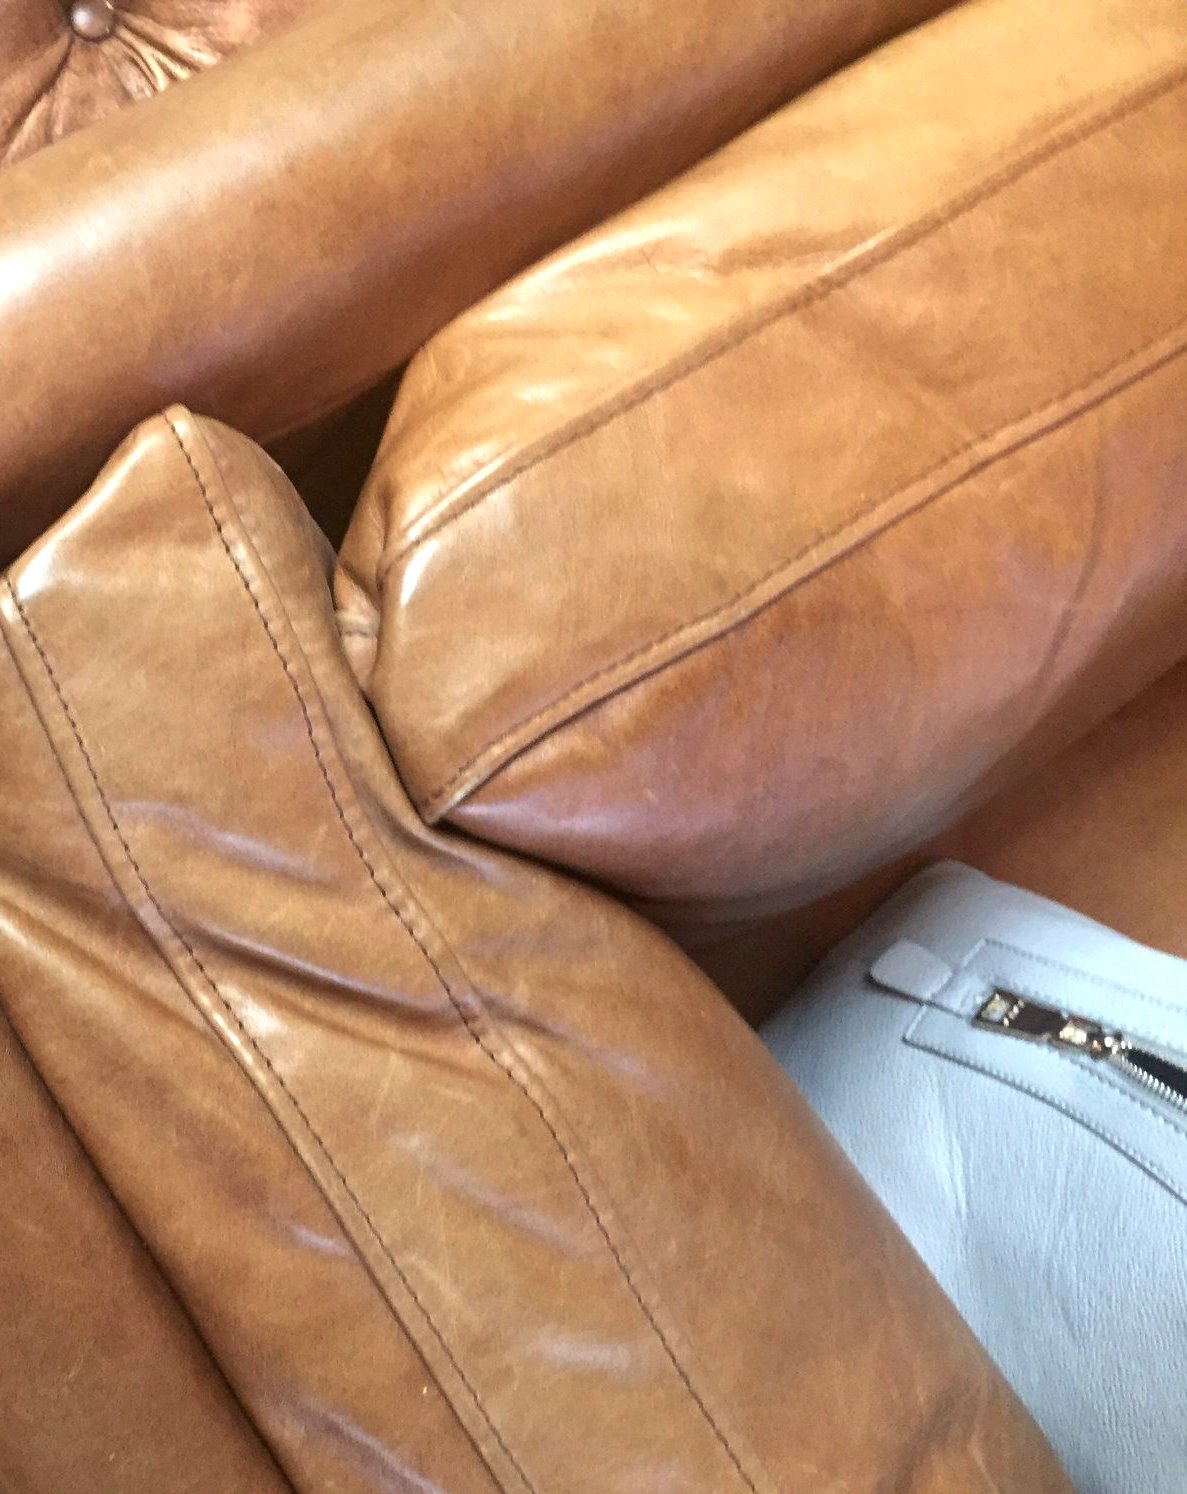 Private couch in a naked tan leather